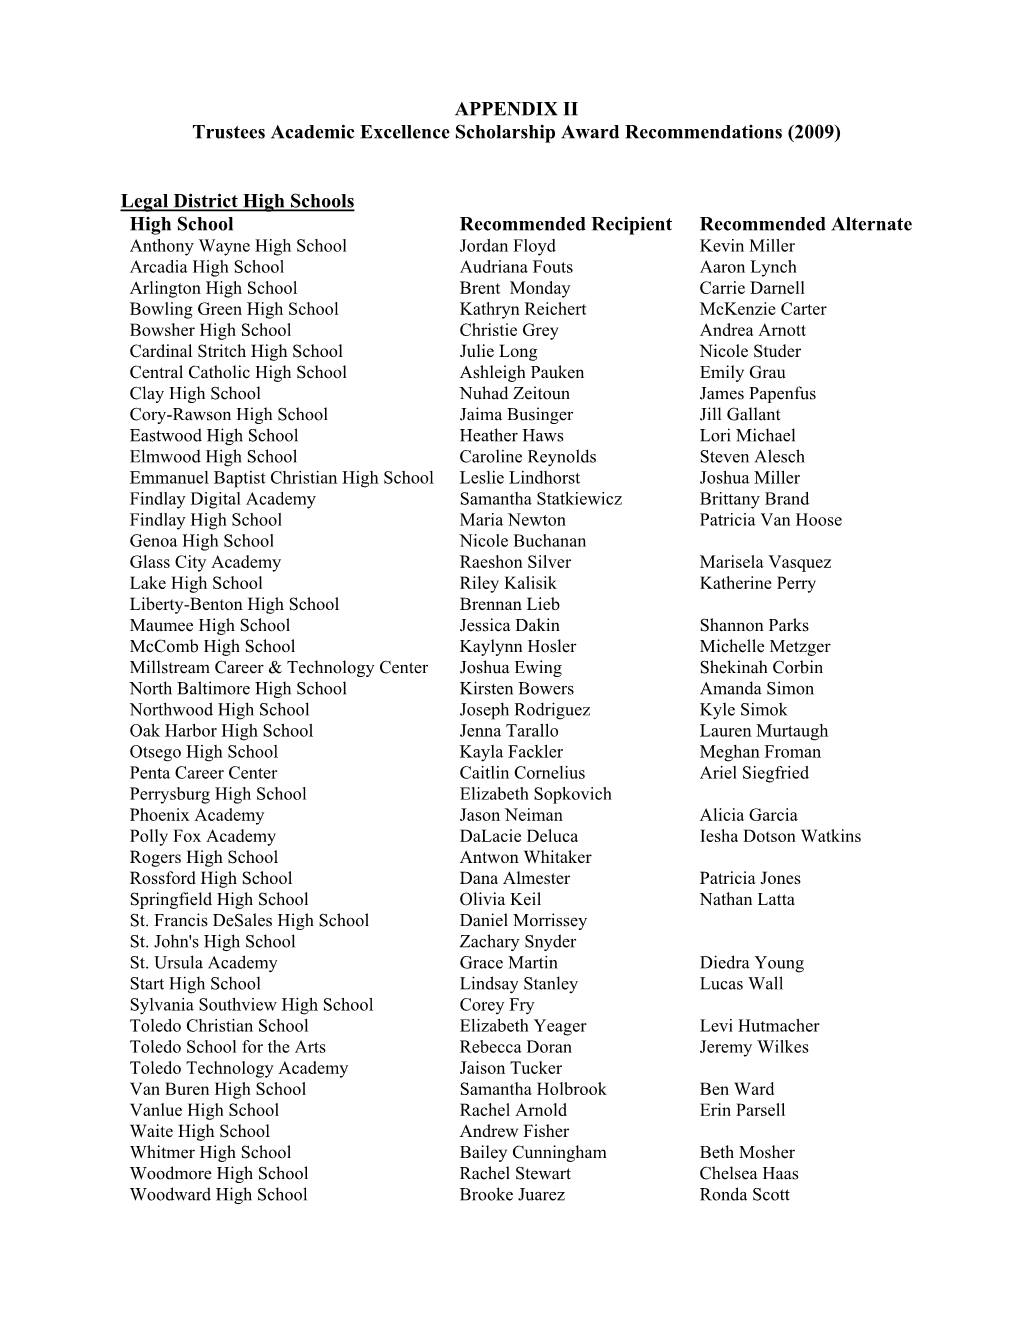 APPENDIX II Trustees Academic Excellence Scholarship Award Recommendations (2009)